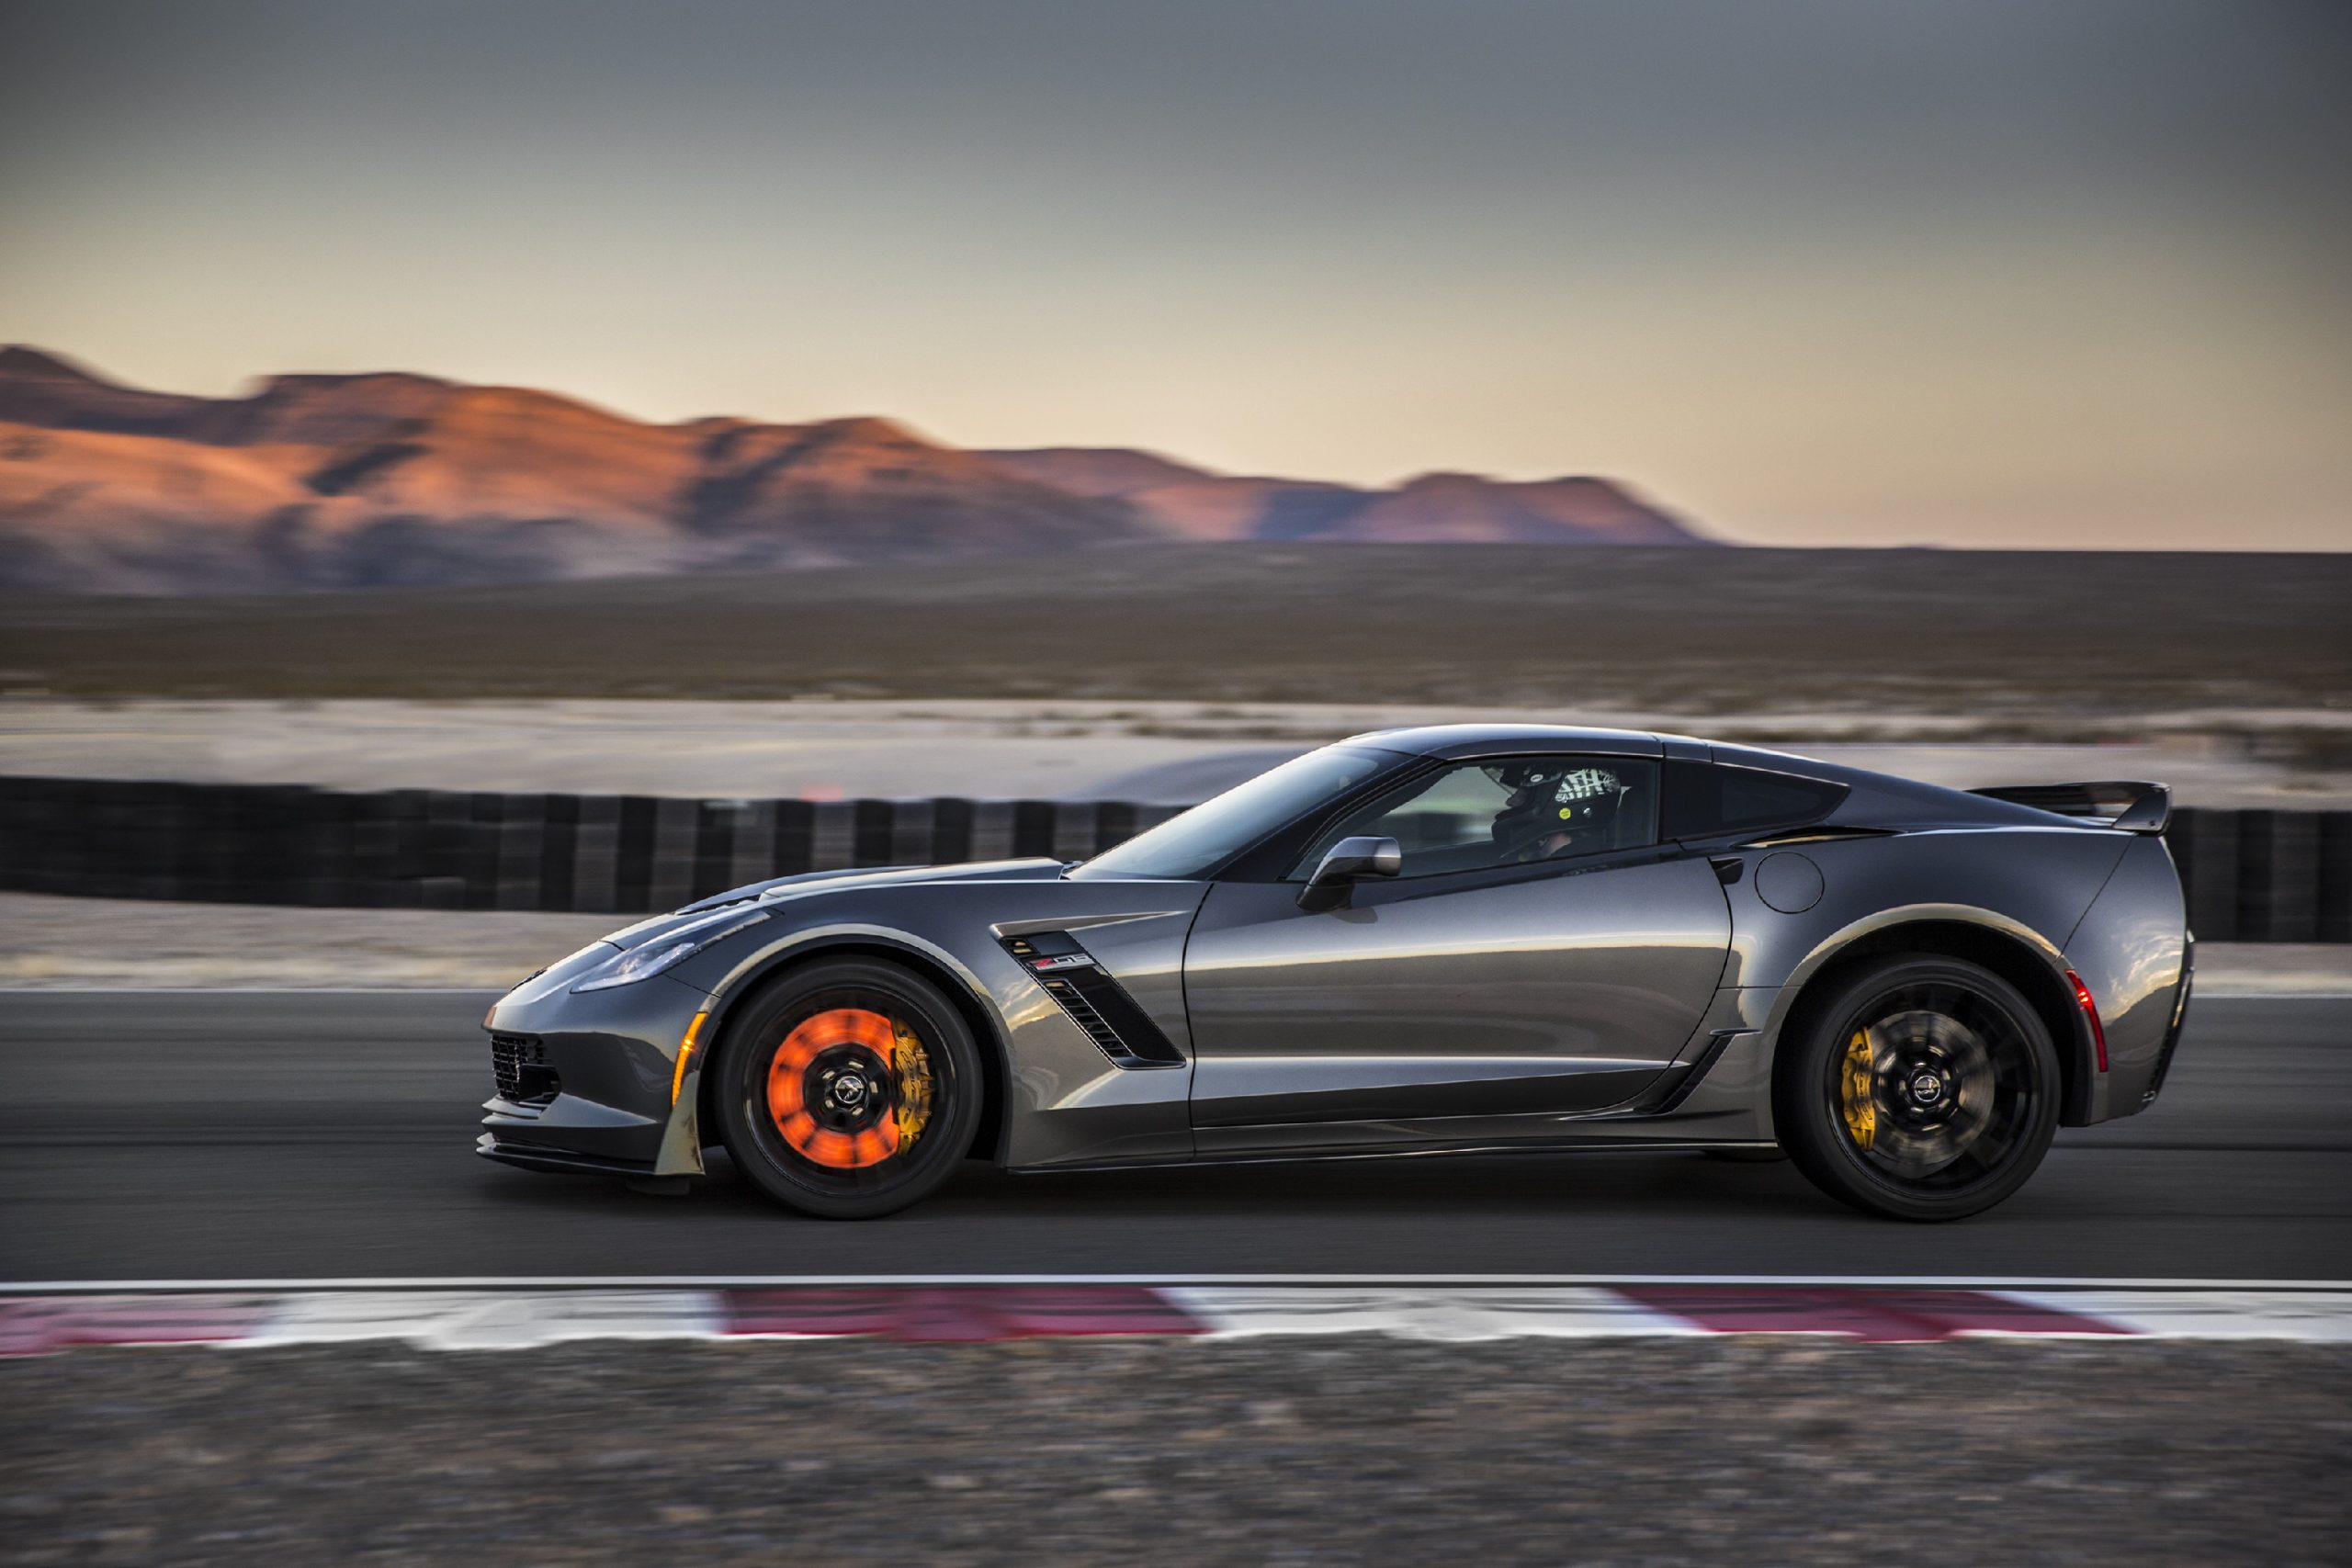 A grey 2019 Chevrolet Corvette Z06 shot in profile with rotors glowing under braking